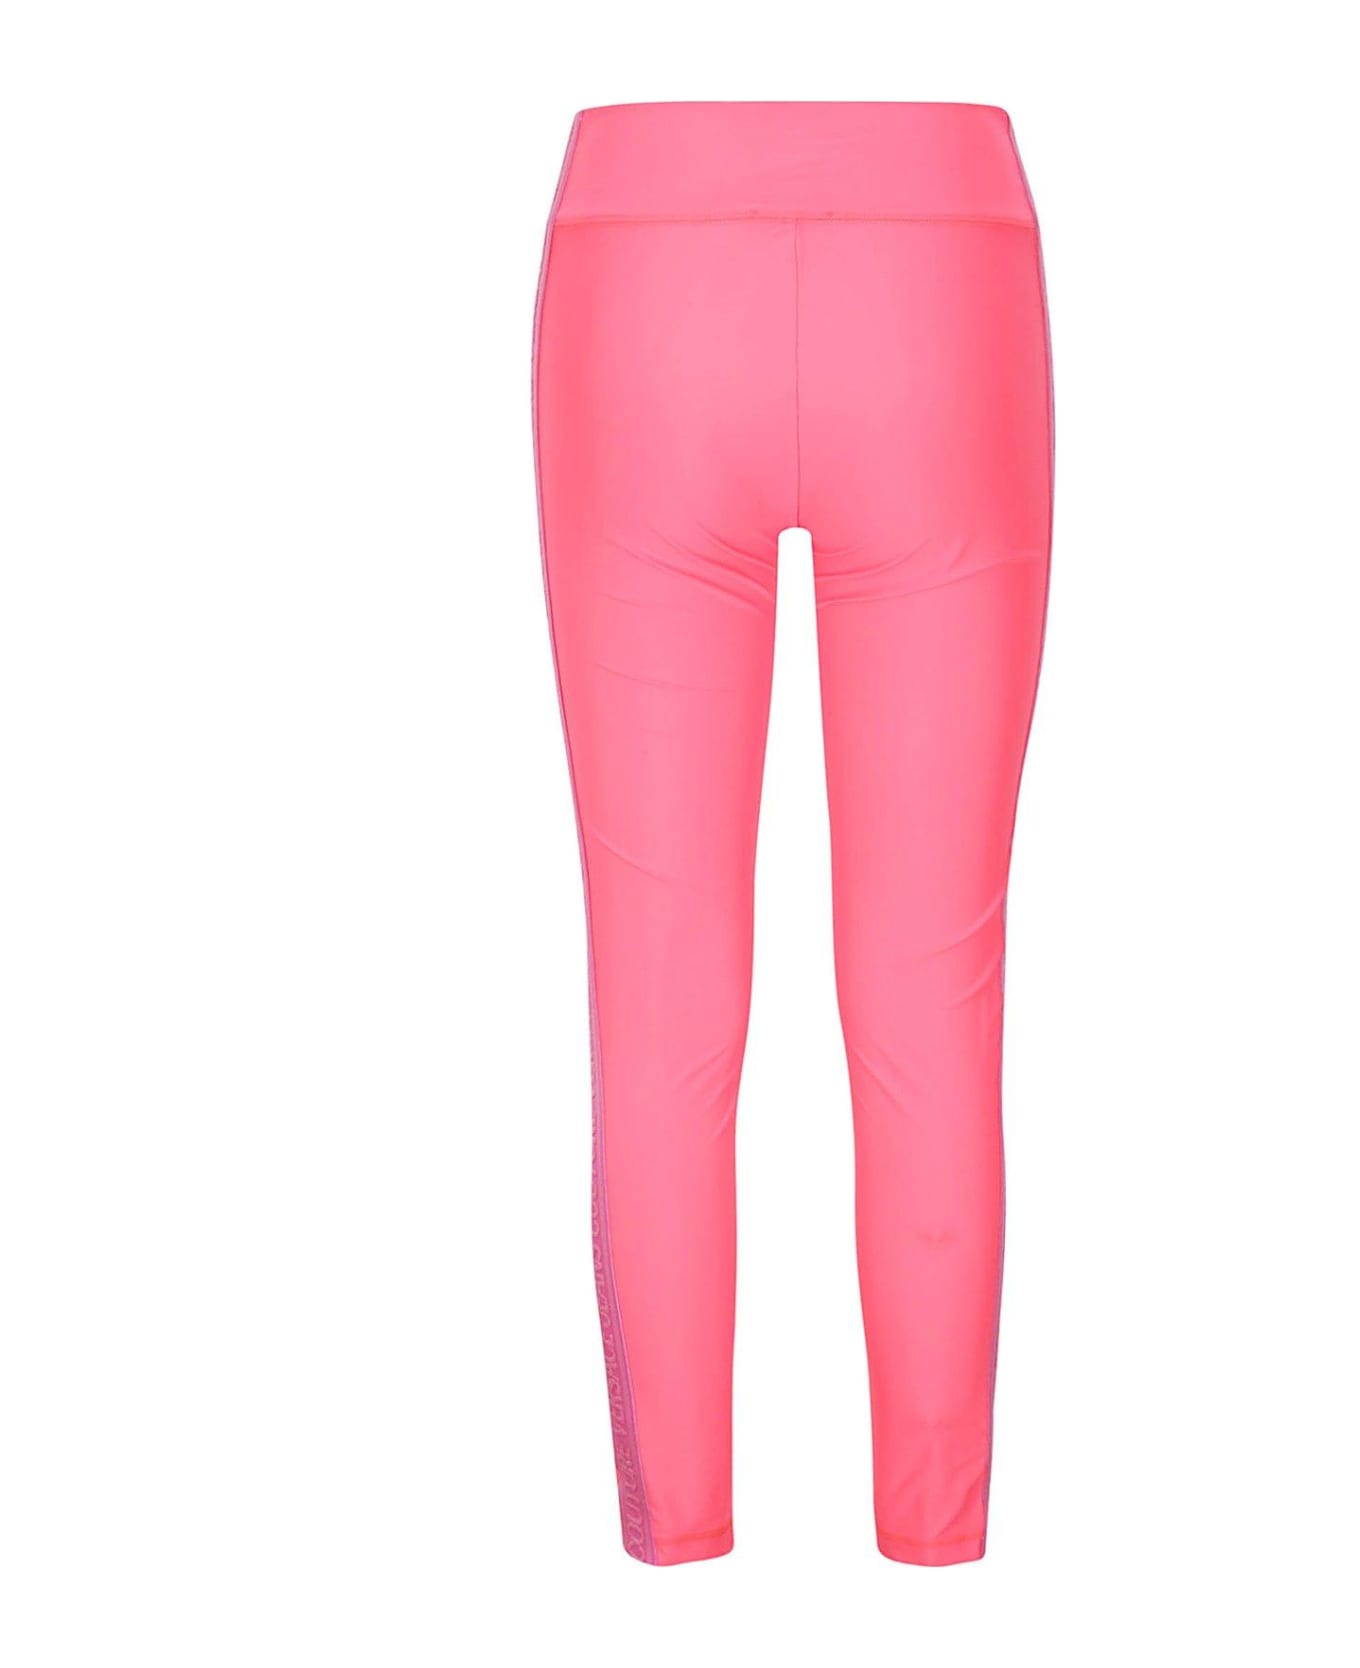 Versace Jeans Couture Leggings - Hot Pink レギンス